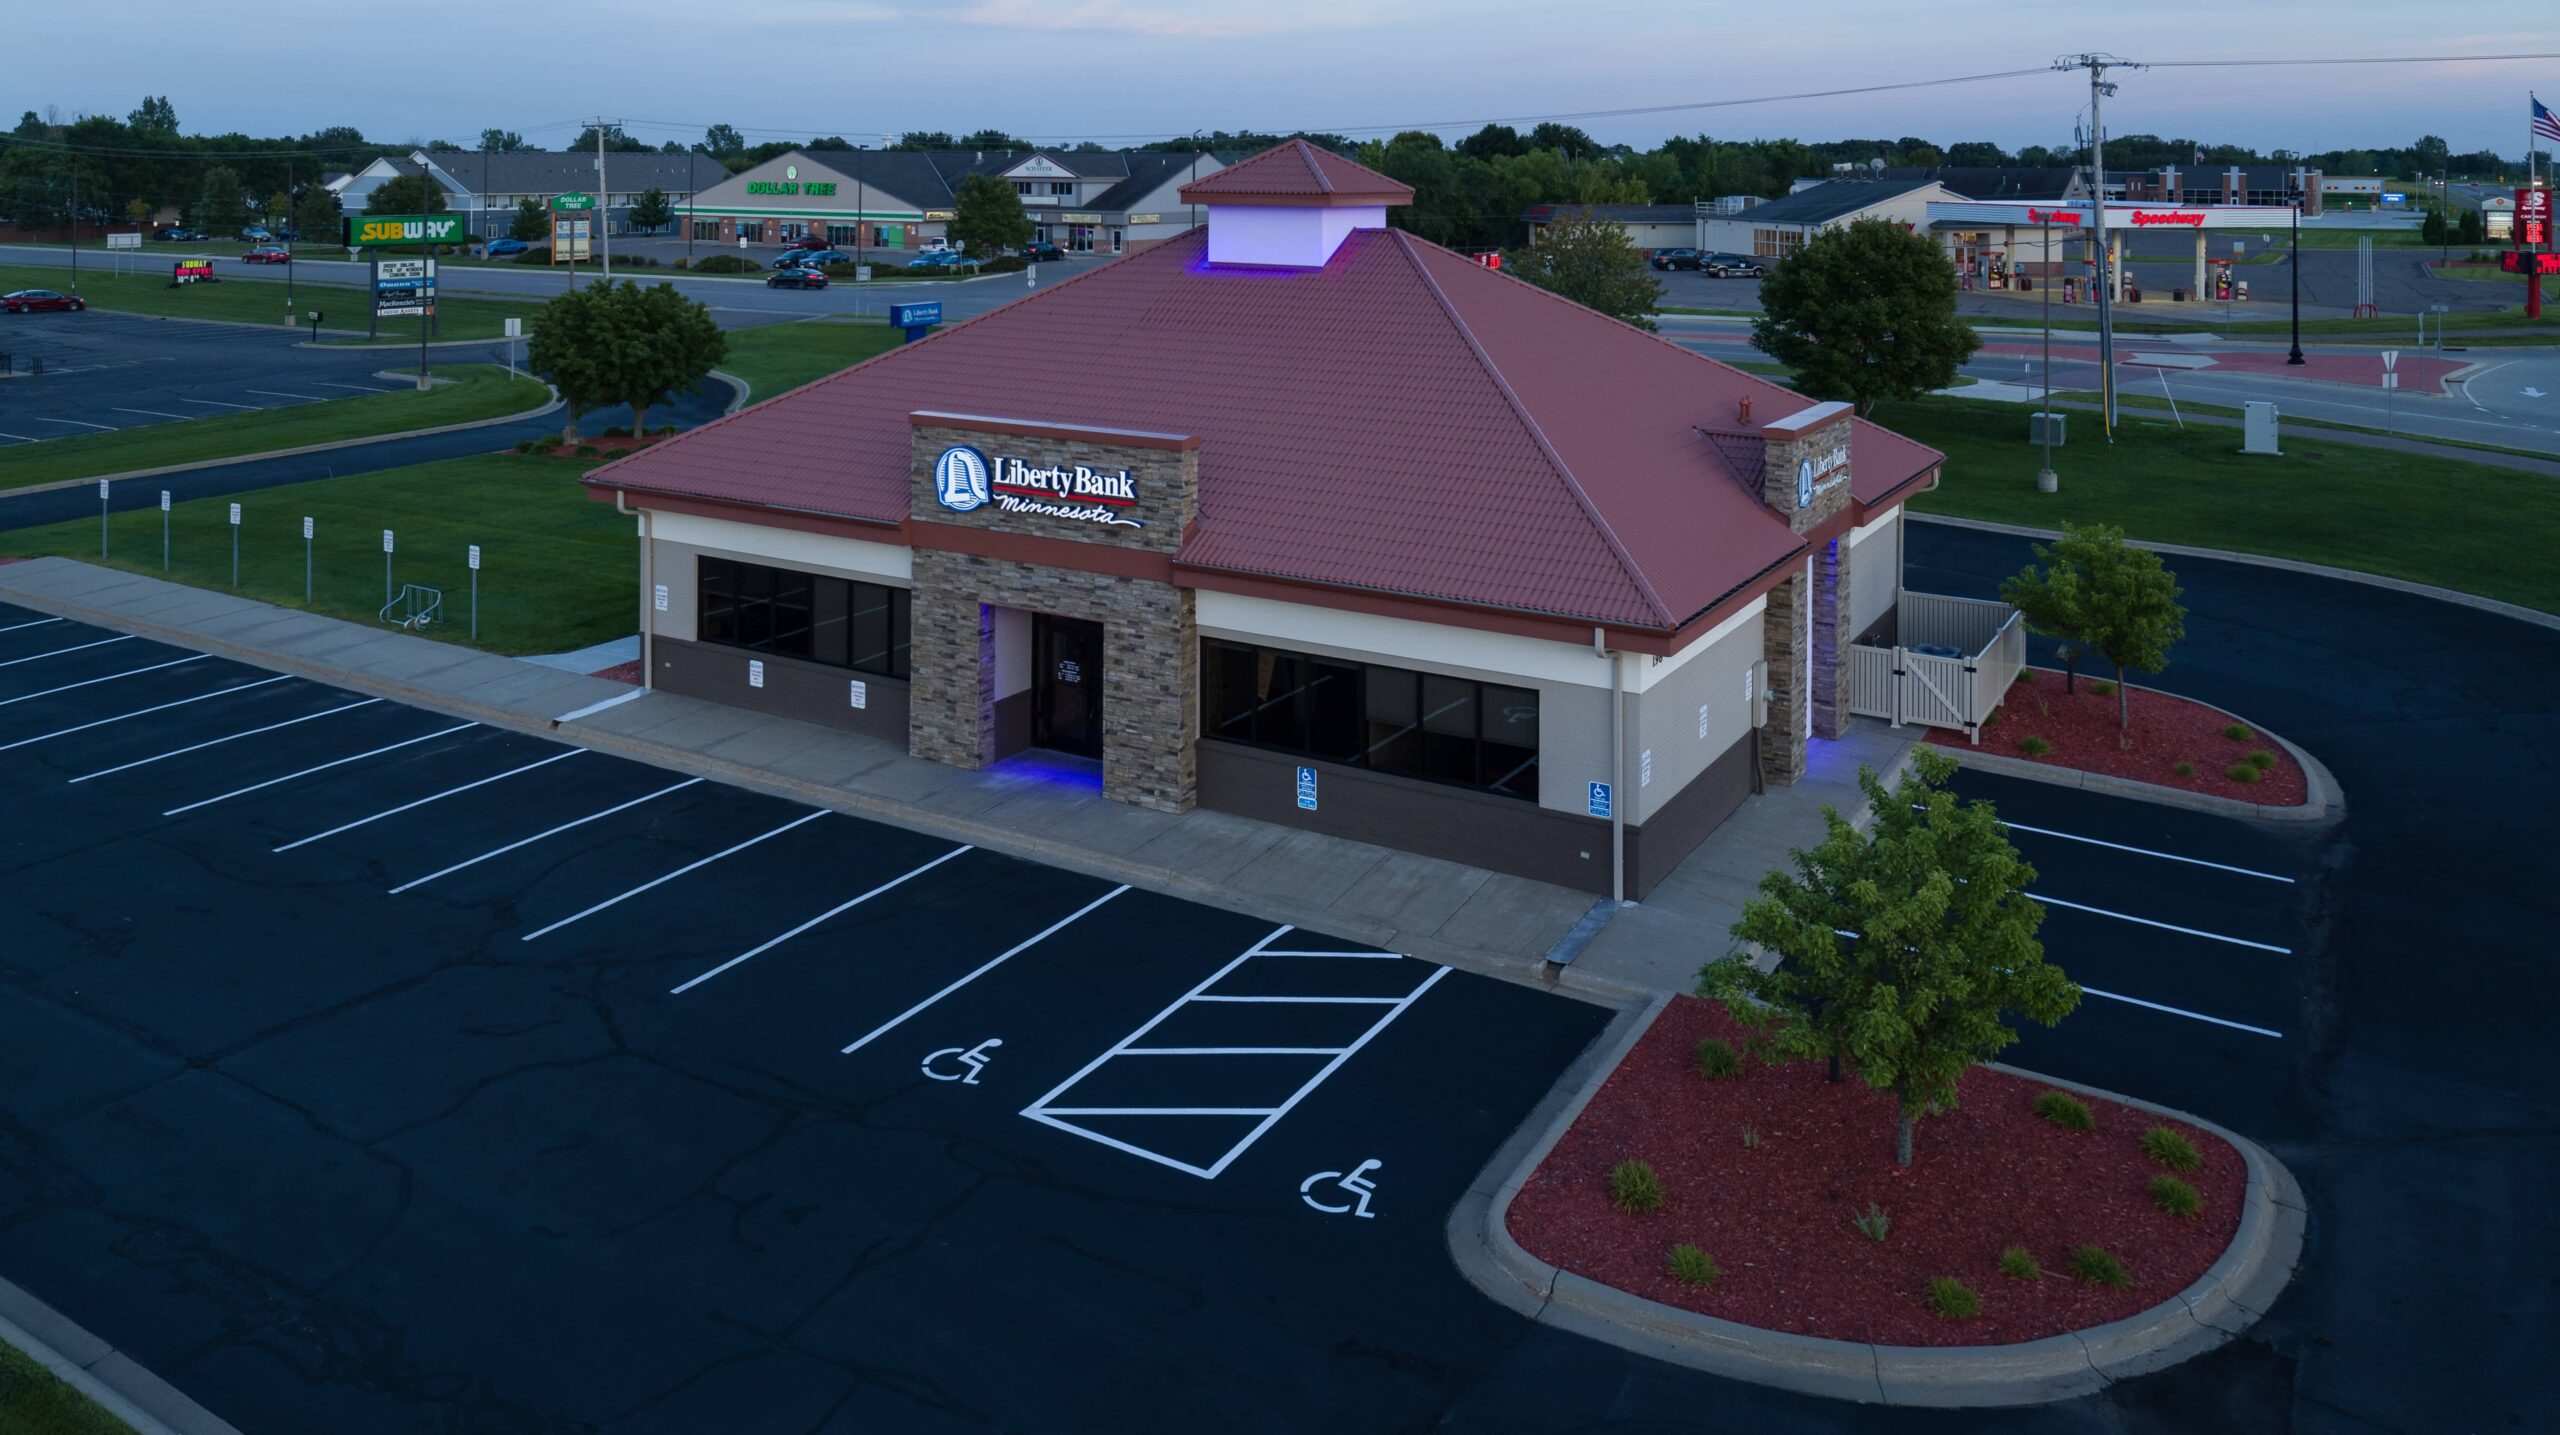 Aerial view of a Liberty Bank office in the evening